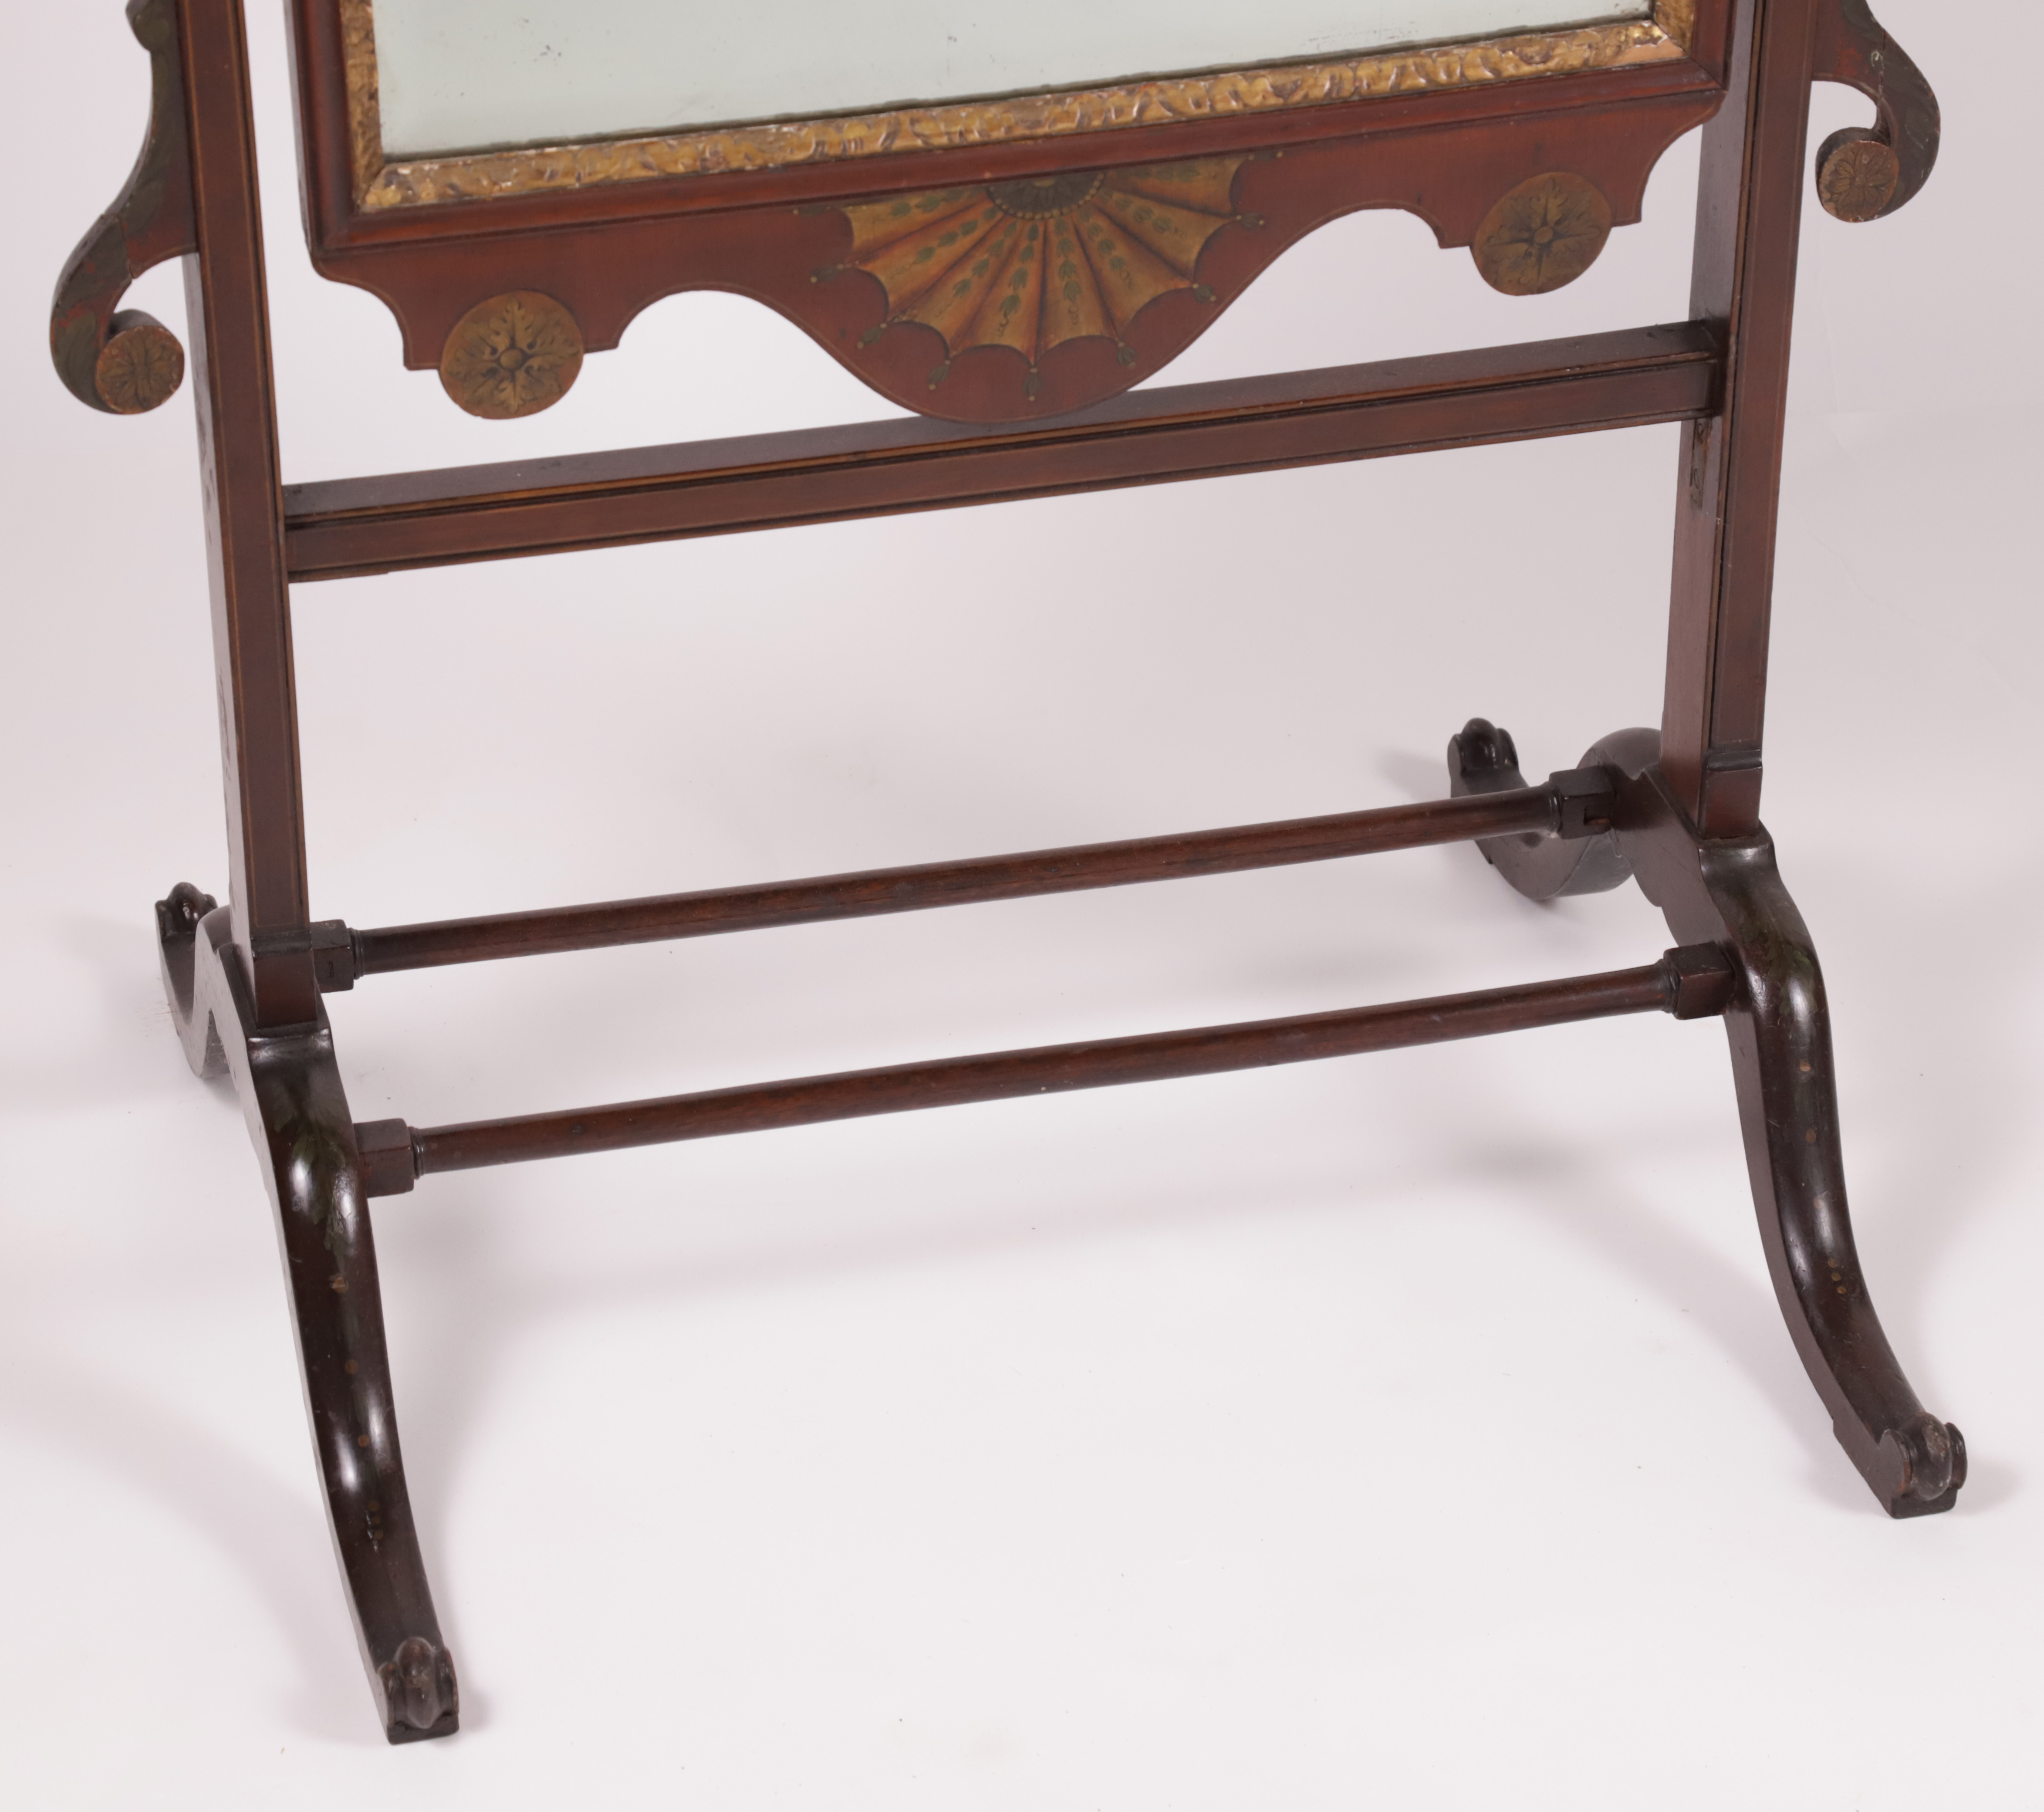 Edwardian Adams Style Decorated Petite Cheval Mirror